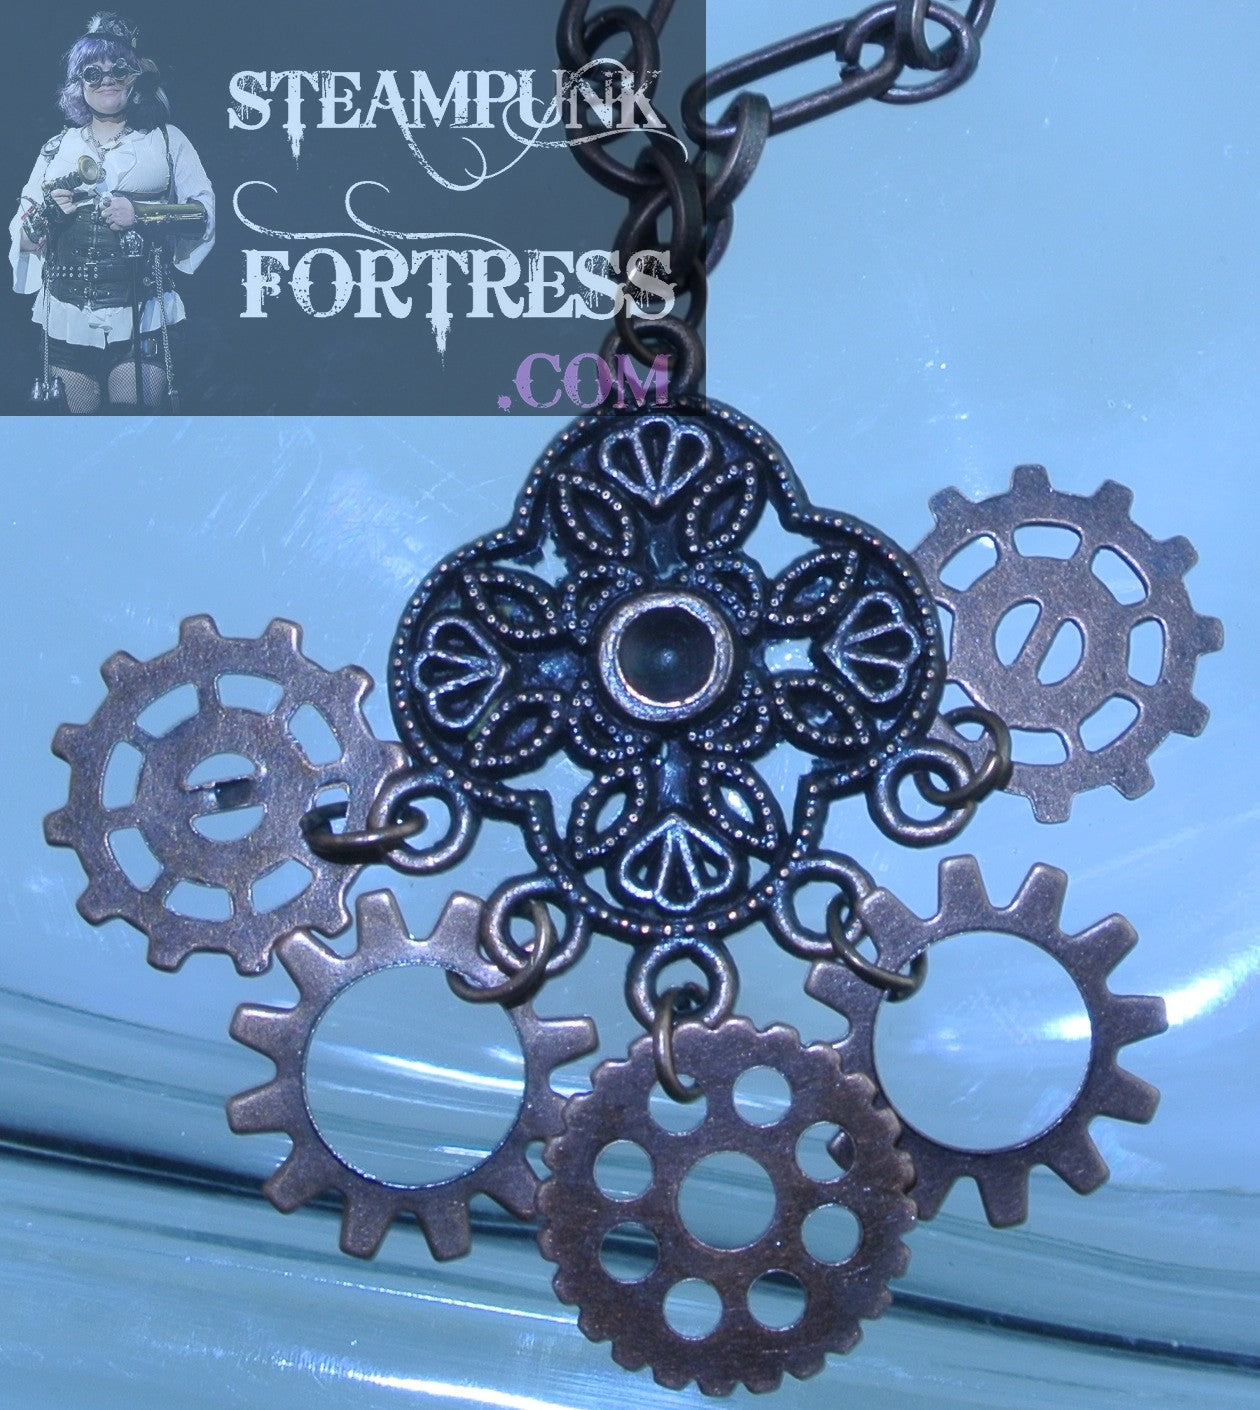 COPPER CLOVER FOCAL DROP 4 SIDED DROP 5 GEARS NECKLACE STARR WILDE STEAMPUNK FORTRESS